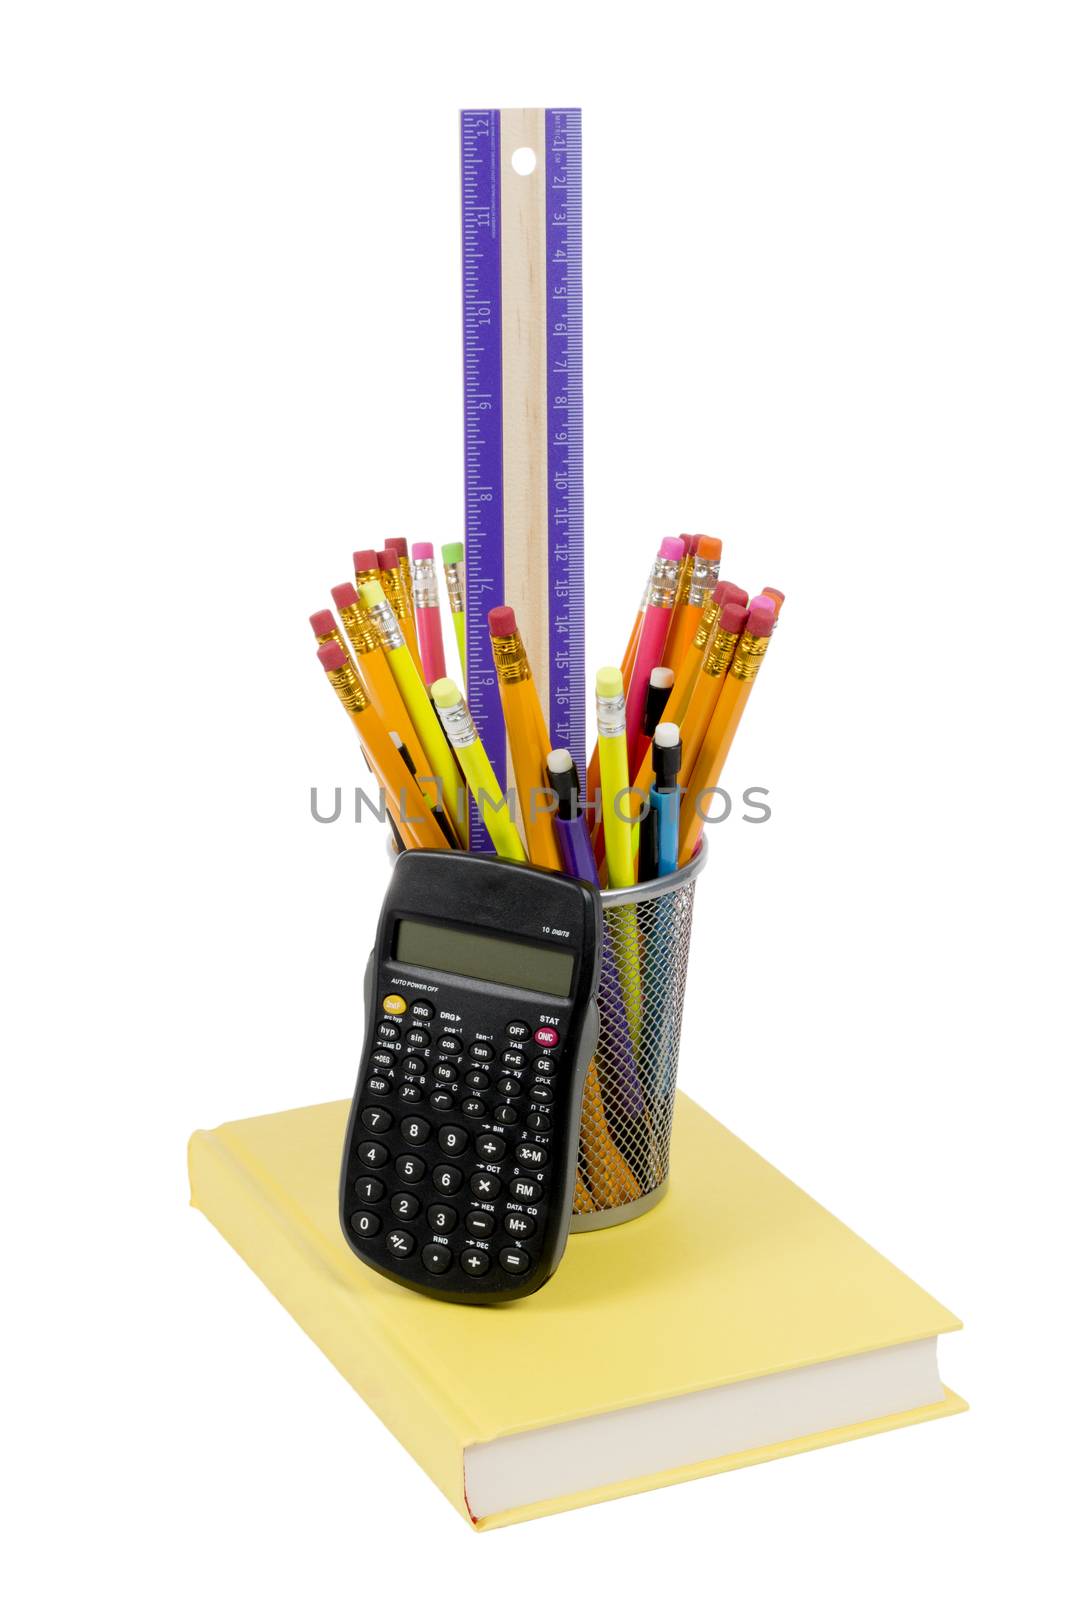 Vertical photograph of brightly colored pencils  and calculator on a yellow book. Isolated on white background.